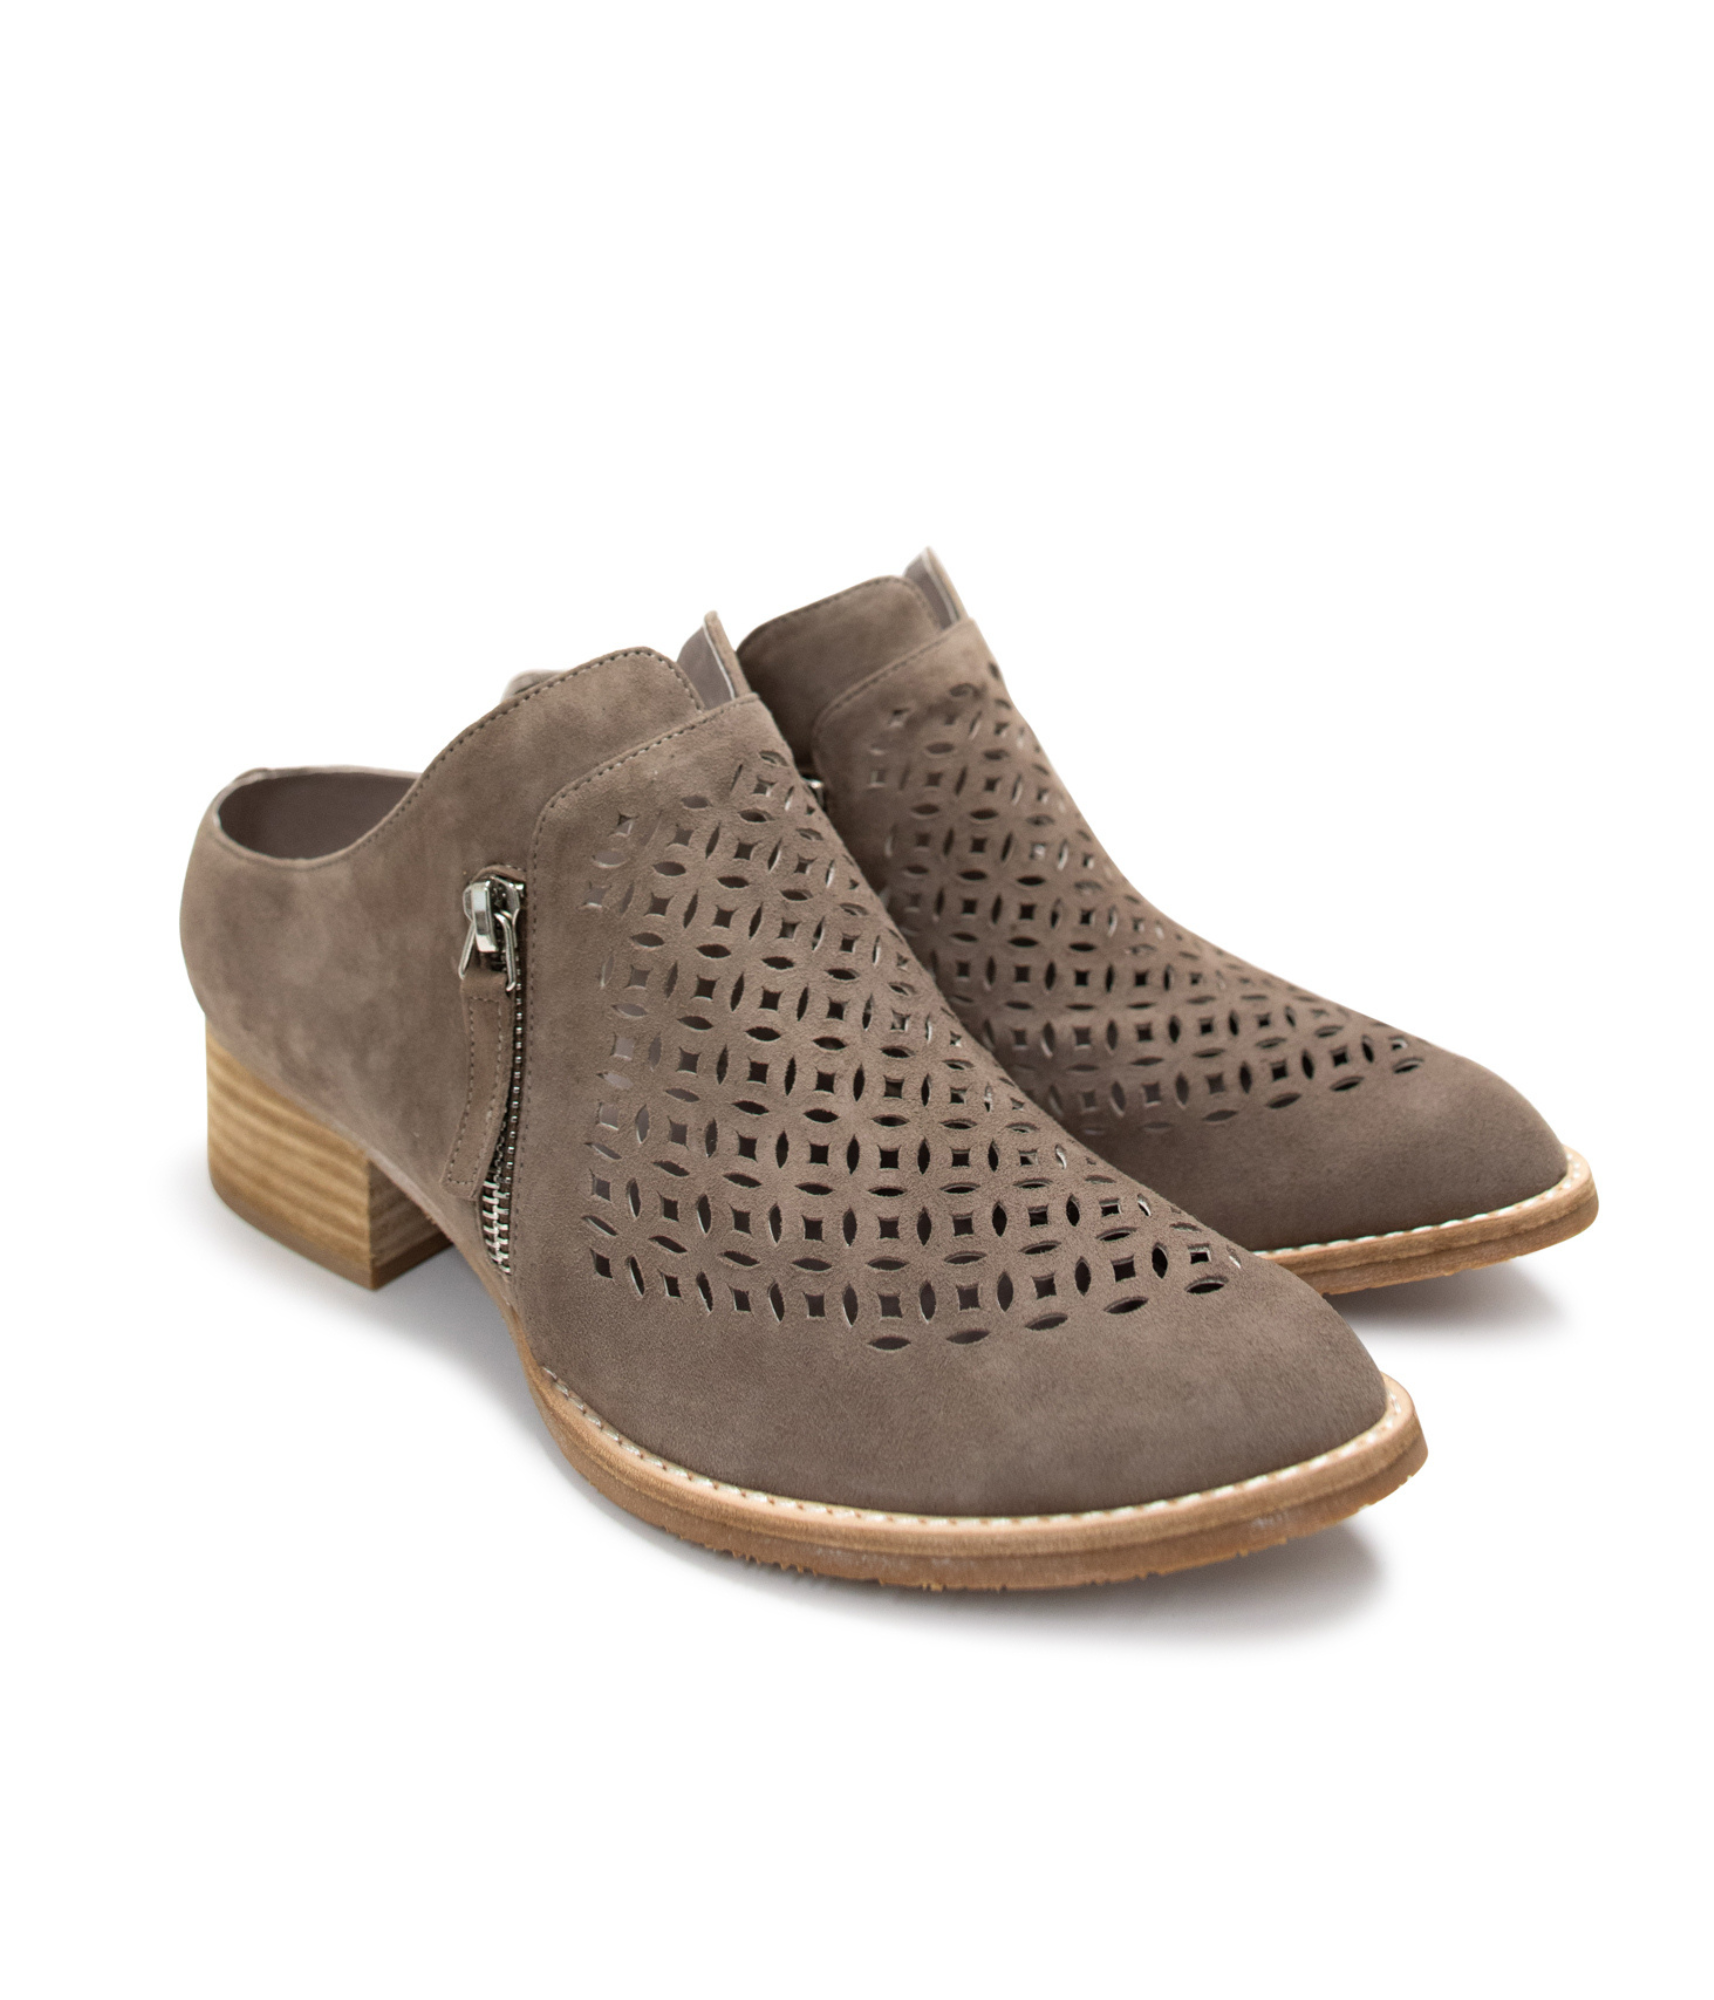 Taniss Leather Mule in Taupe